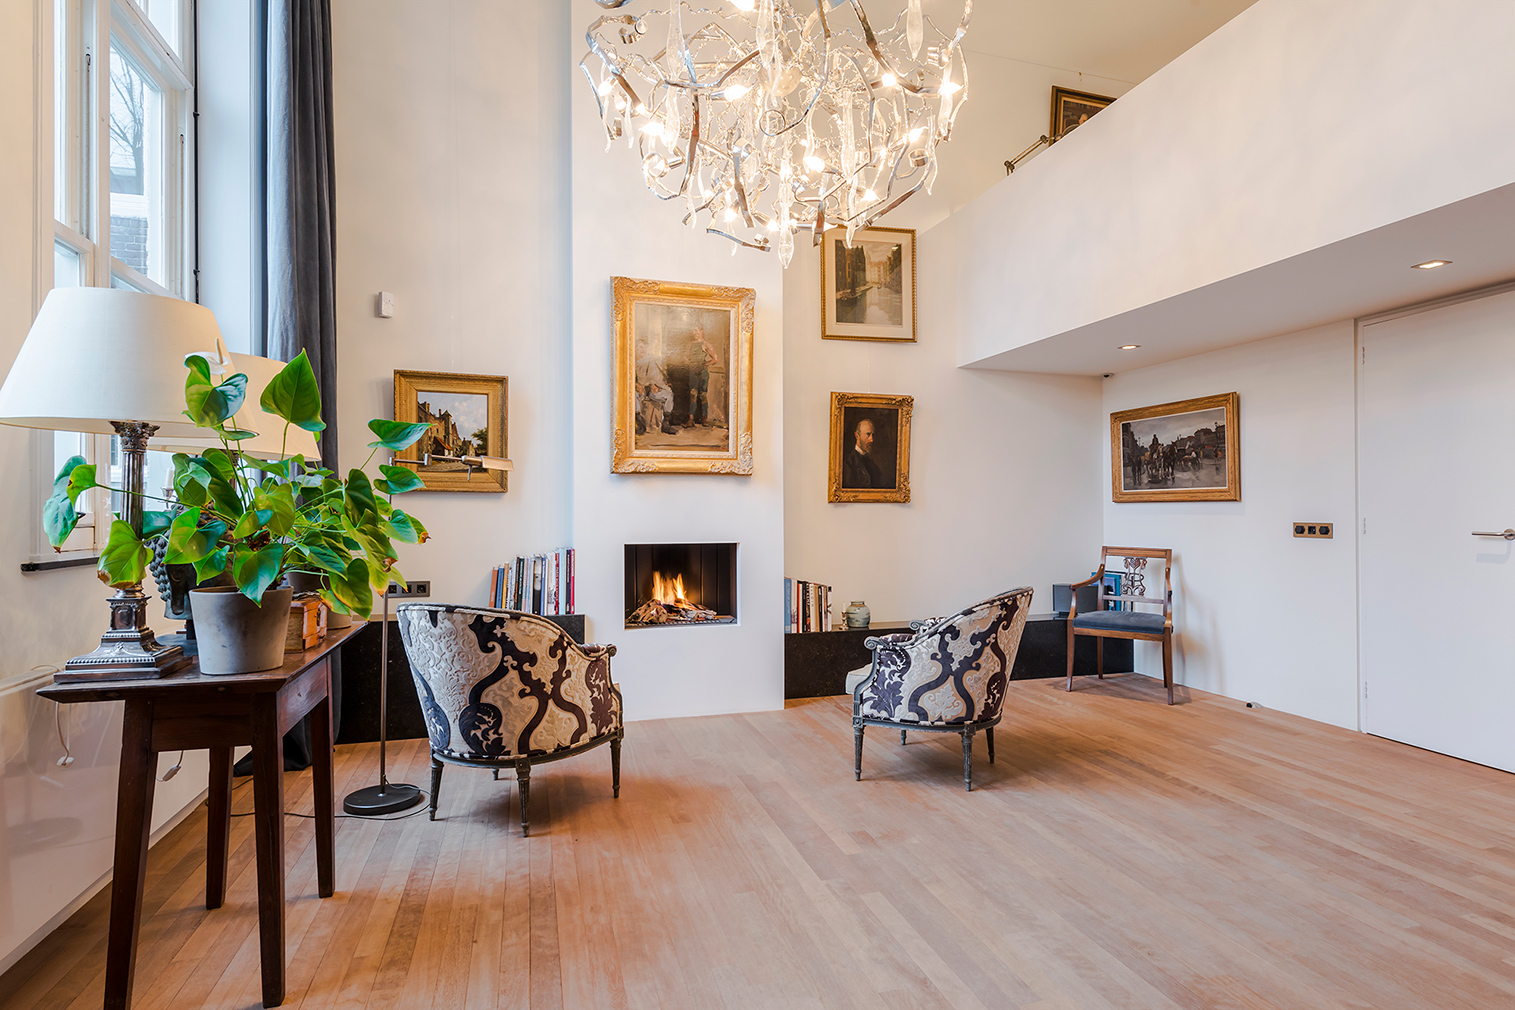 Property of the week: converted schoolhouse in Amsterdam